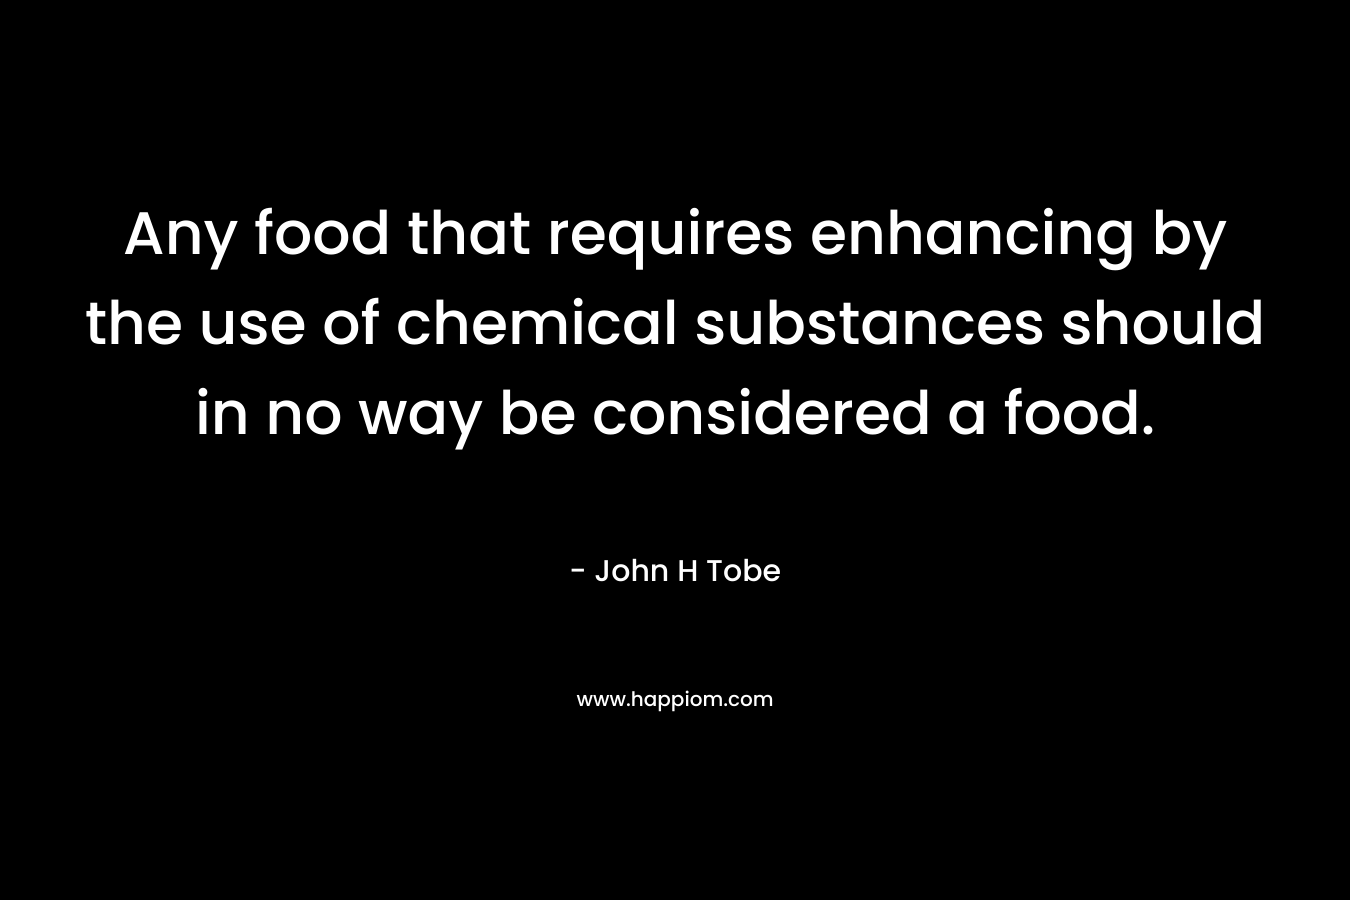 Any food that requires enhancing by the use of chemical substances should in no way be considered a food. – John H Tobe